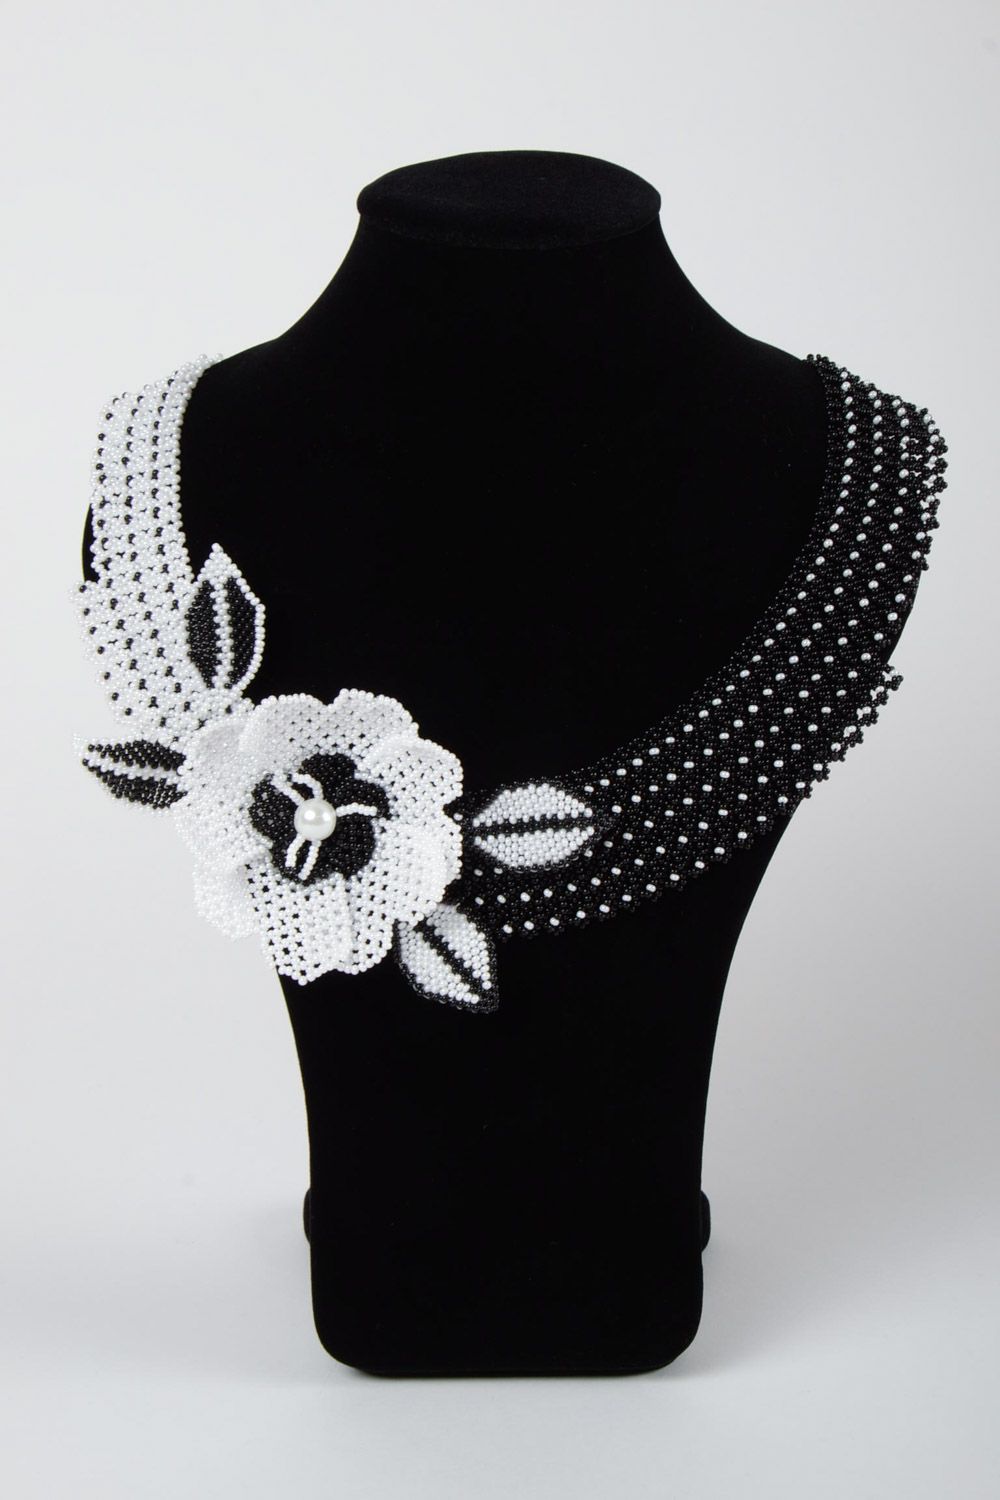 Handmade beautiful necklace made of Czech beads with a large black and white flower photo 1